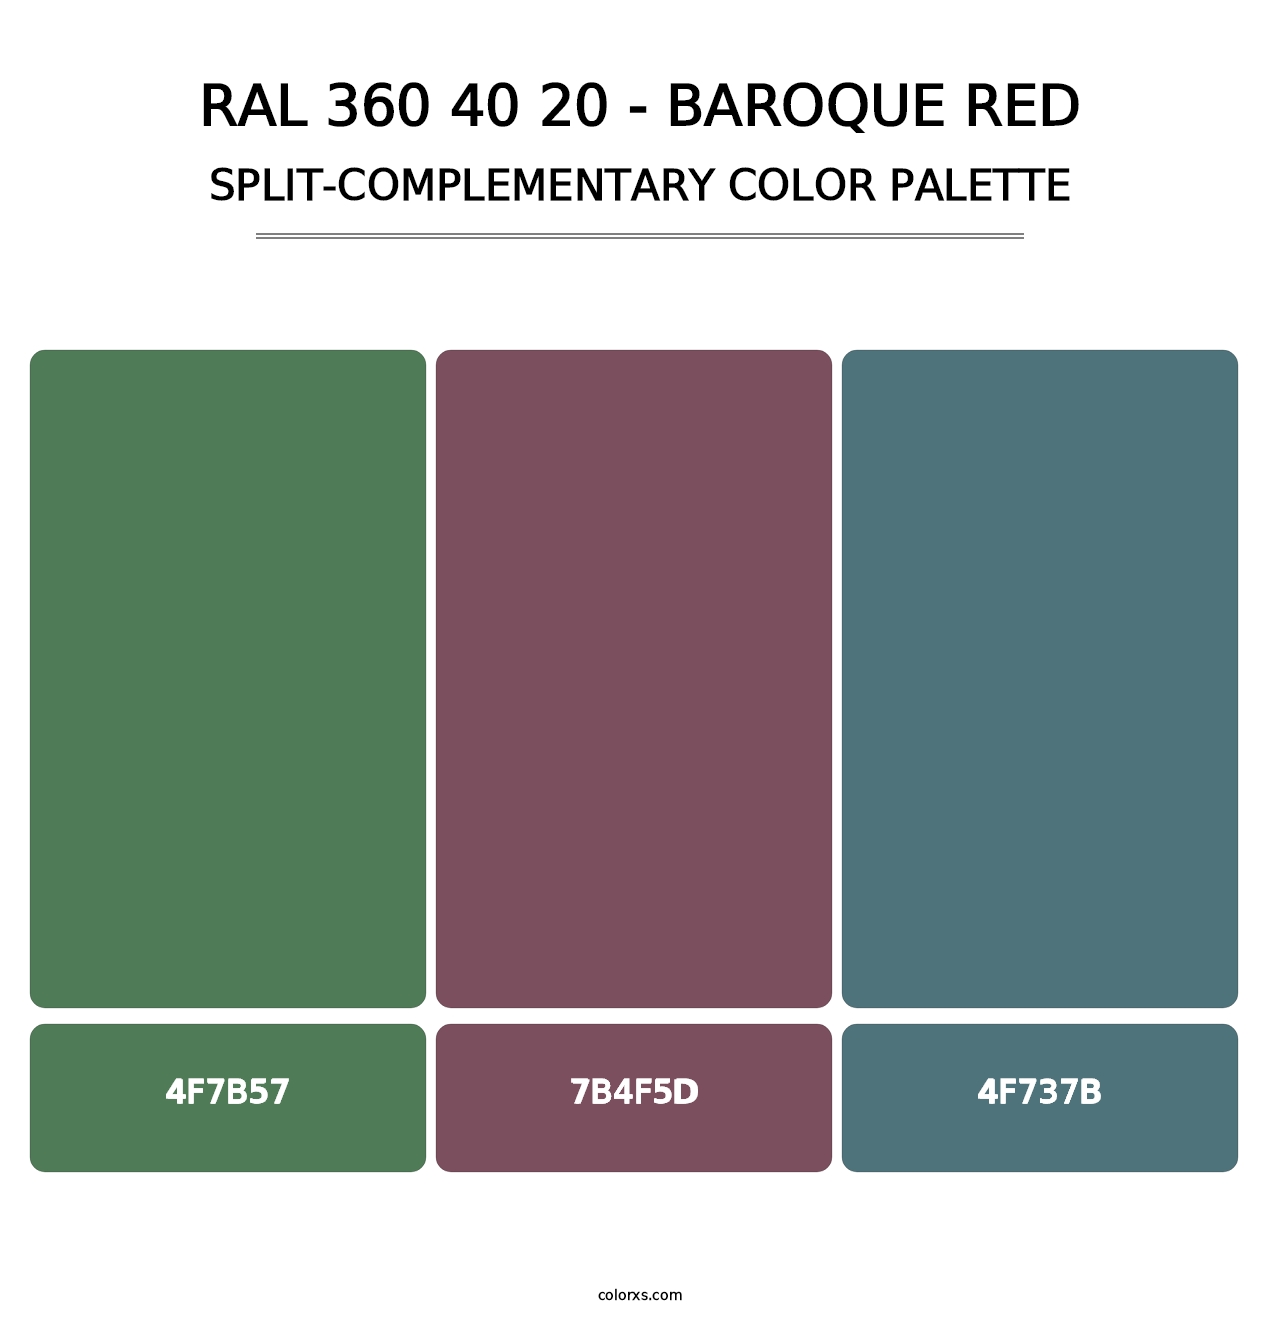 RAL 360 40 20 - Baroque Red - Split-Complementary Color Palette